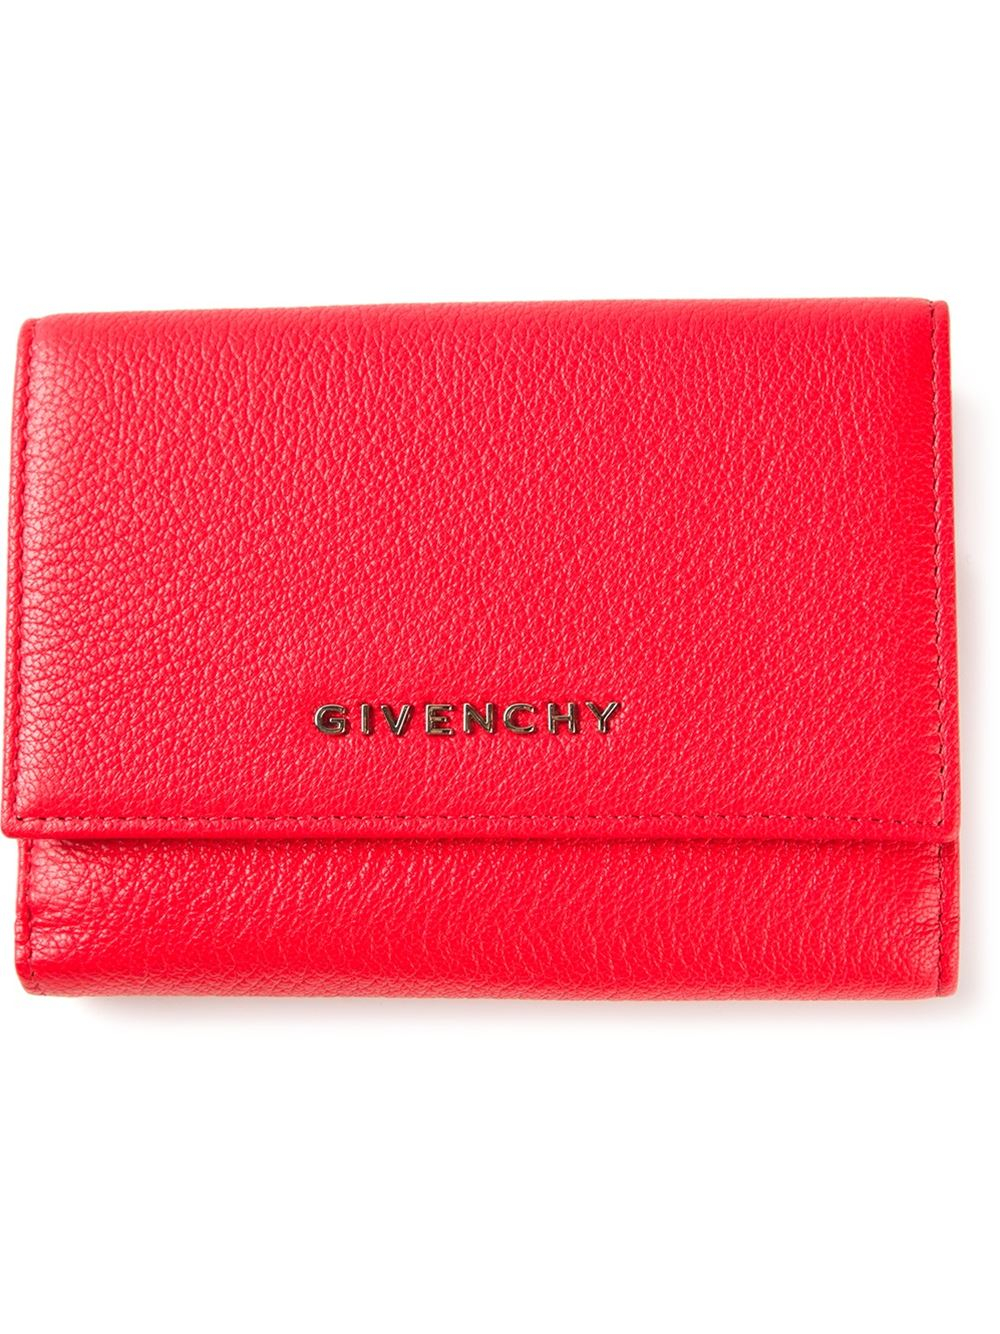 Givenchy Pandora Wallet in Red - Lyst